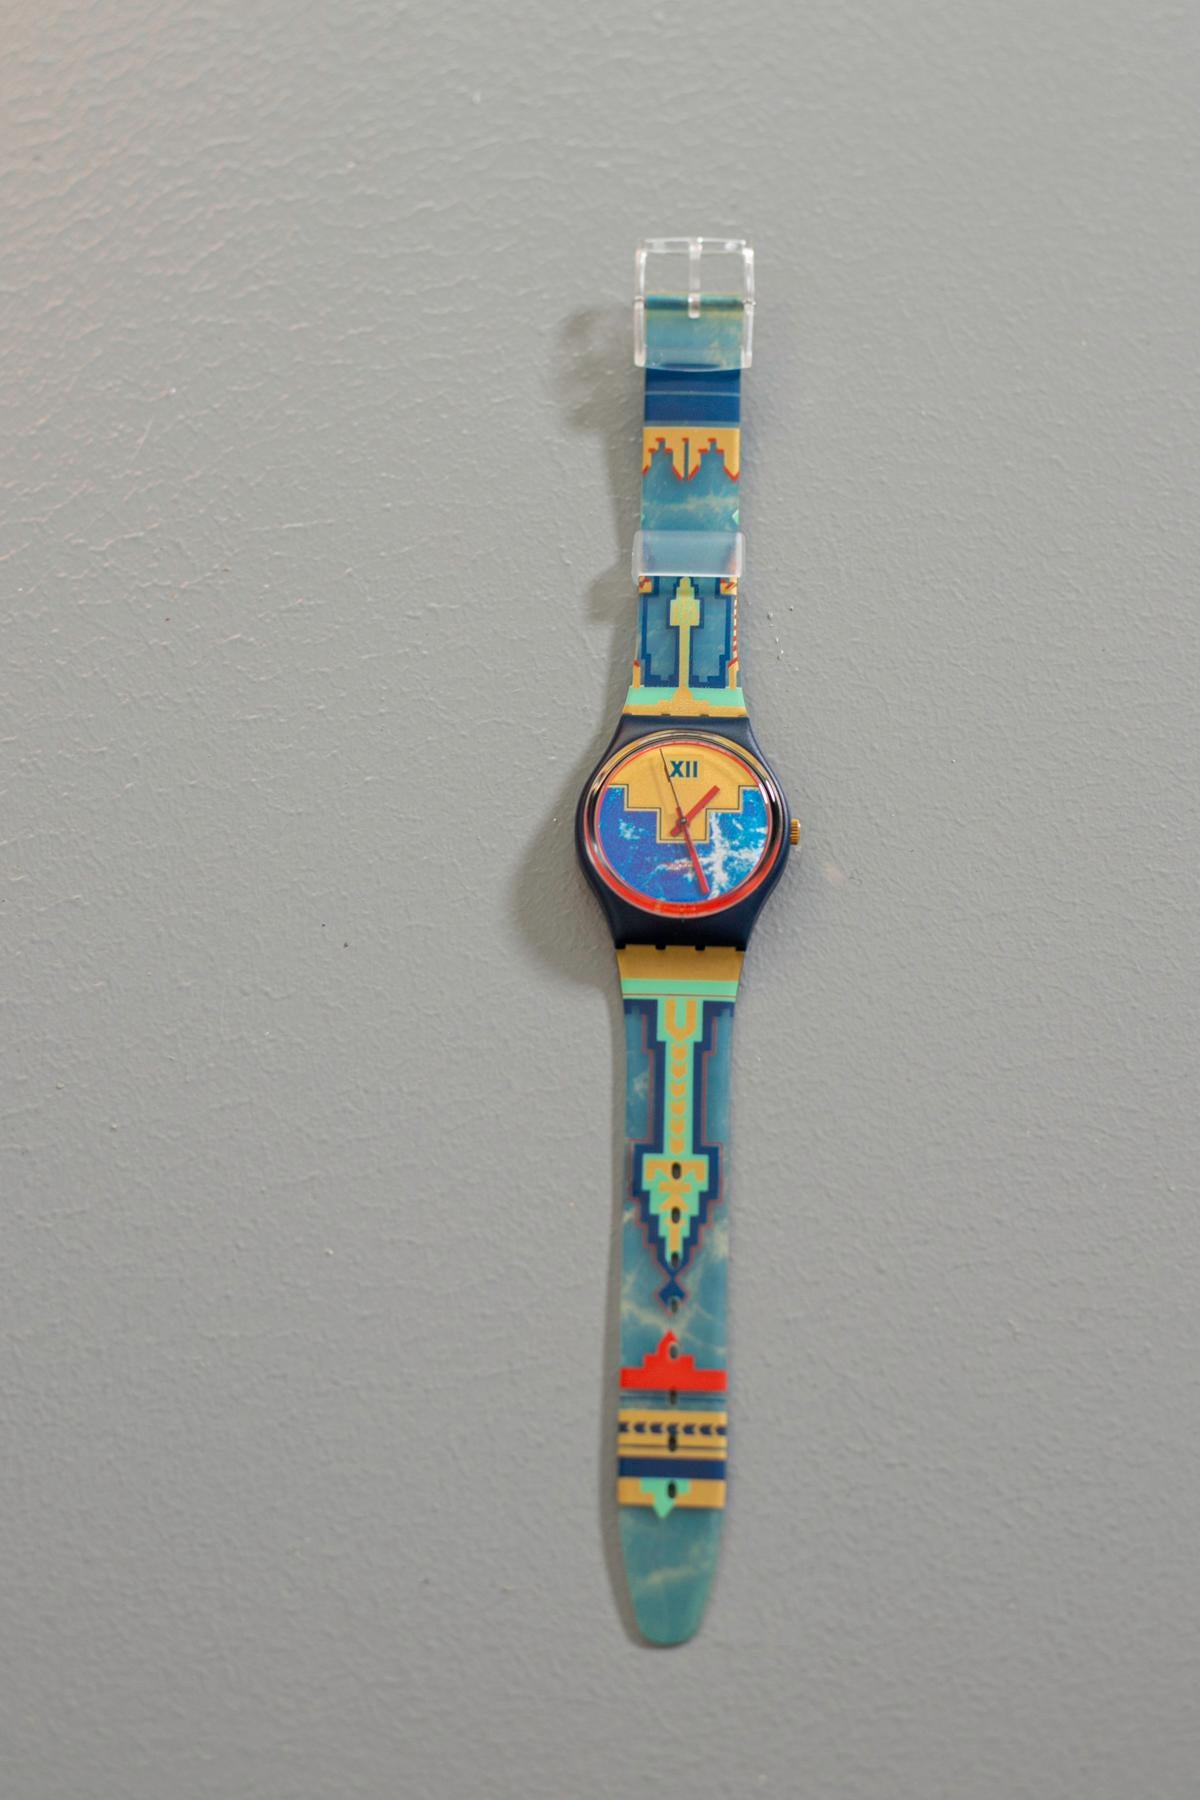 A vintage Swatch with a truly unique design. The strap has a texture reminiscent of tribal patterns, the colors of this watch make it perfect combined with a sophisticated or even romantic outfit.

Case Material: Plastic
Strap Material: